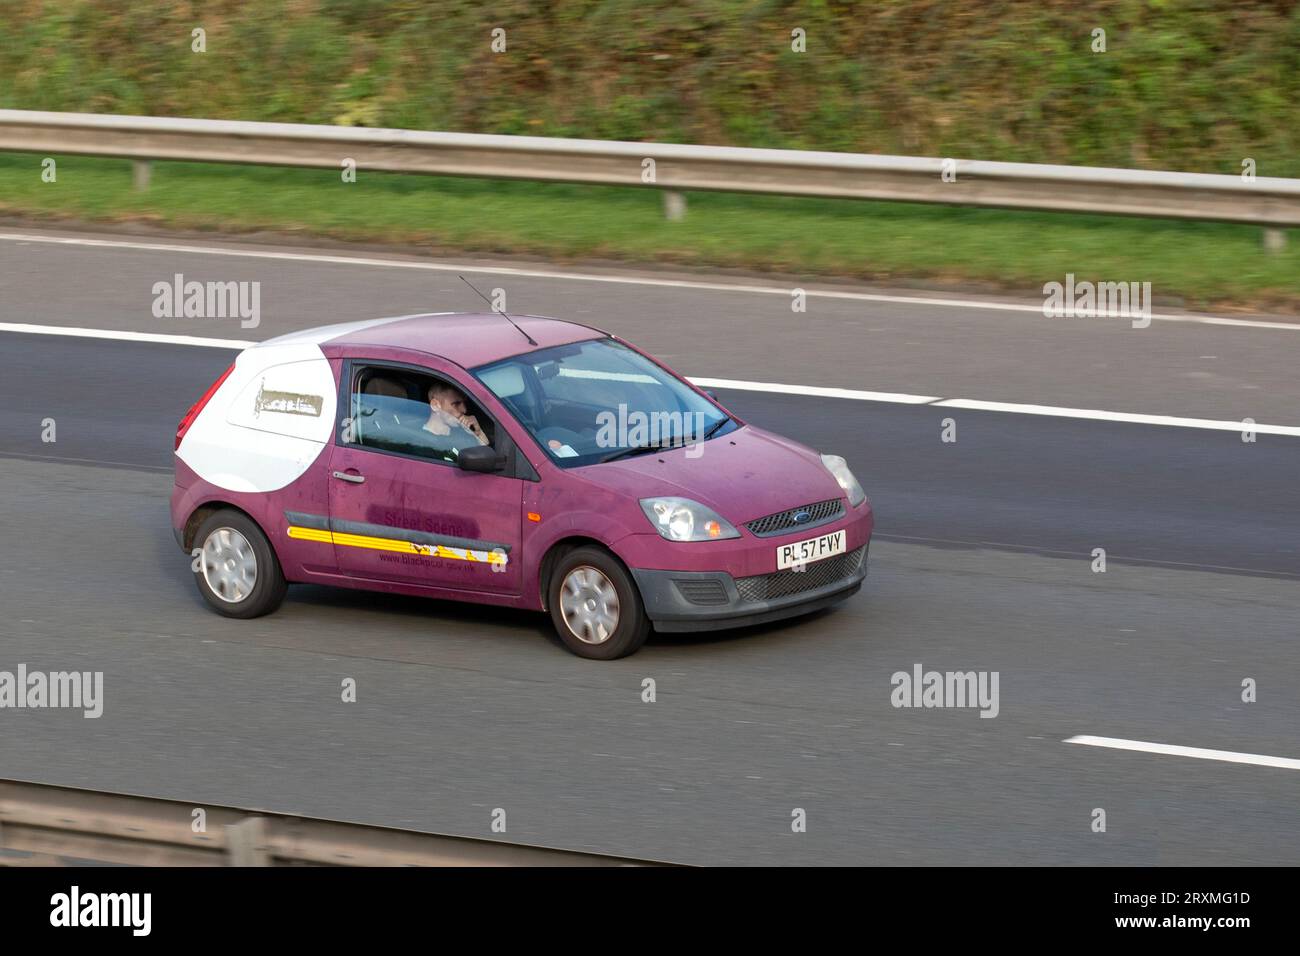 2008 Ford 'Street Scene' Fiesta Tdci DT 68 LCV Car Derived Van Diesel 1399 cc; travelling at speed on the M6 motorway in Greater Manchester, UK Stock Photo